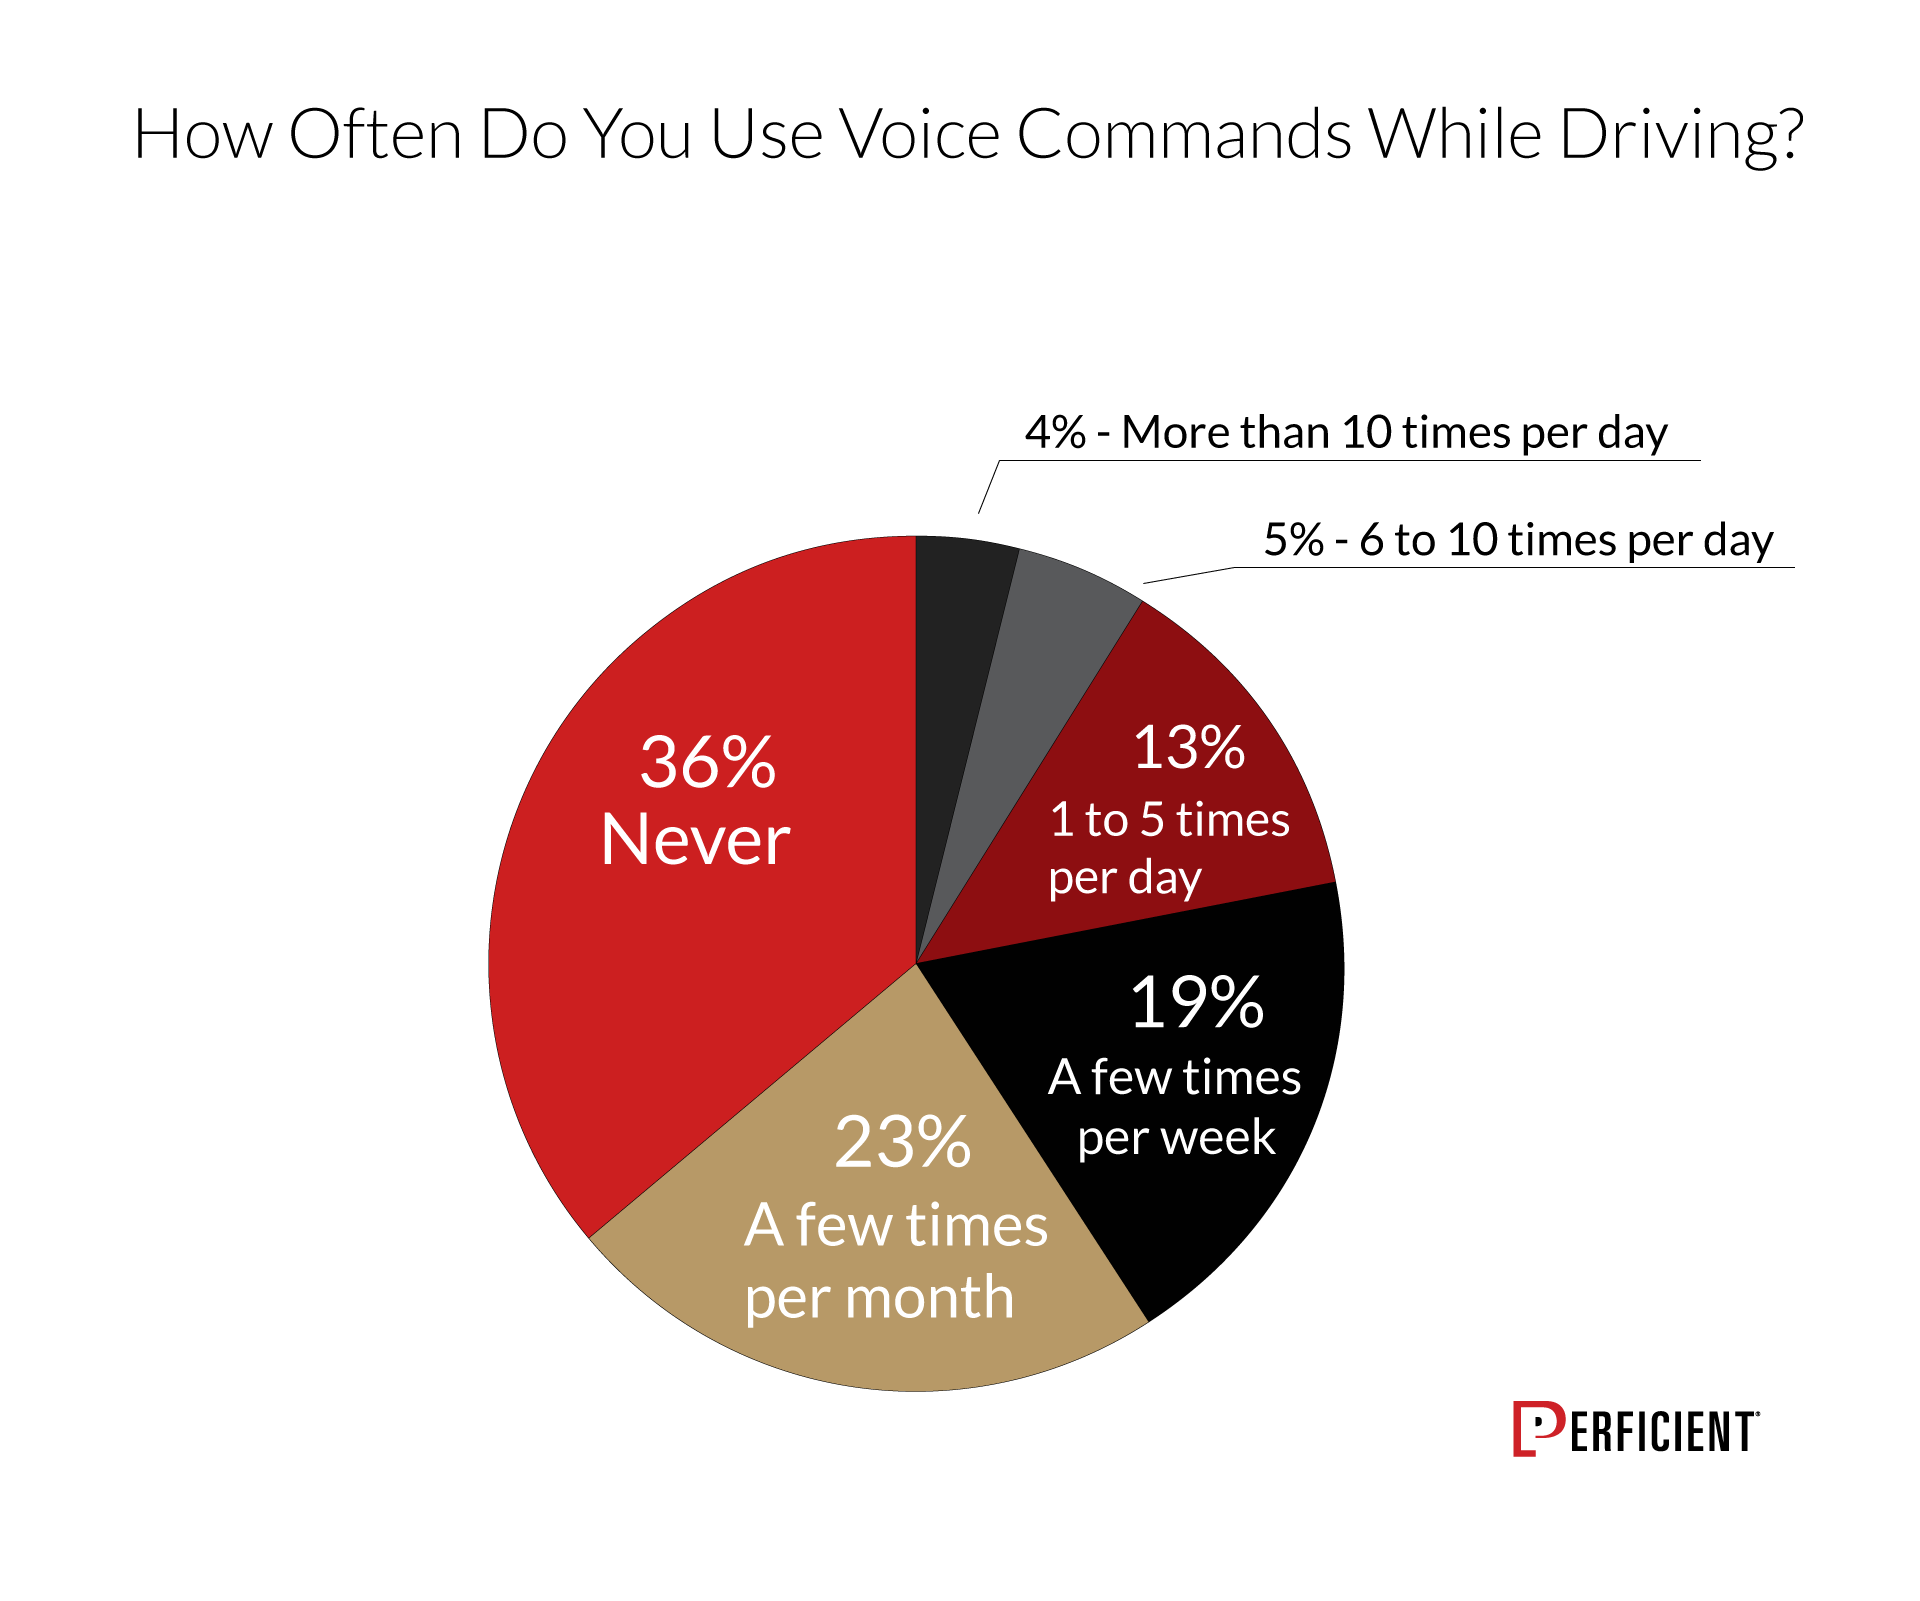 Chart shows how often users use voice commands while driving